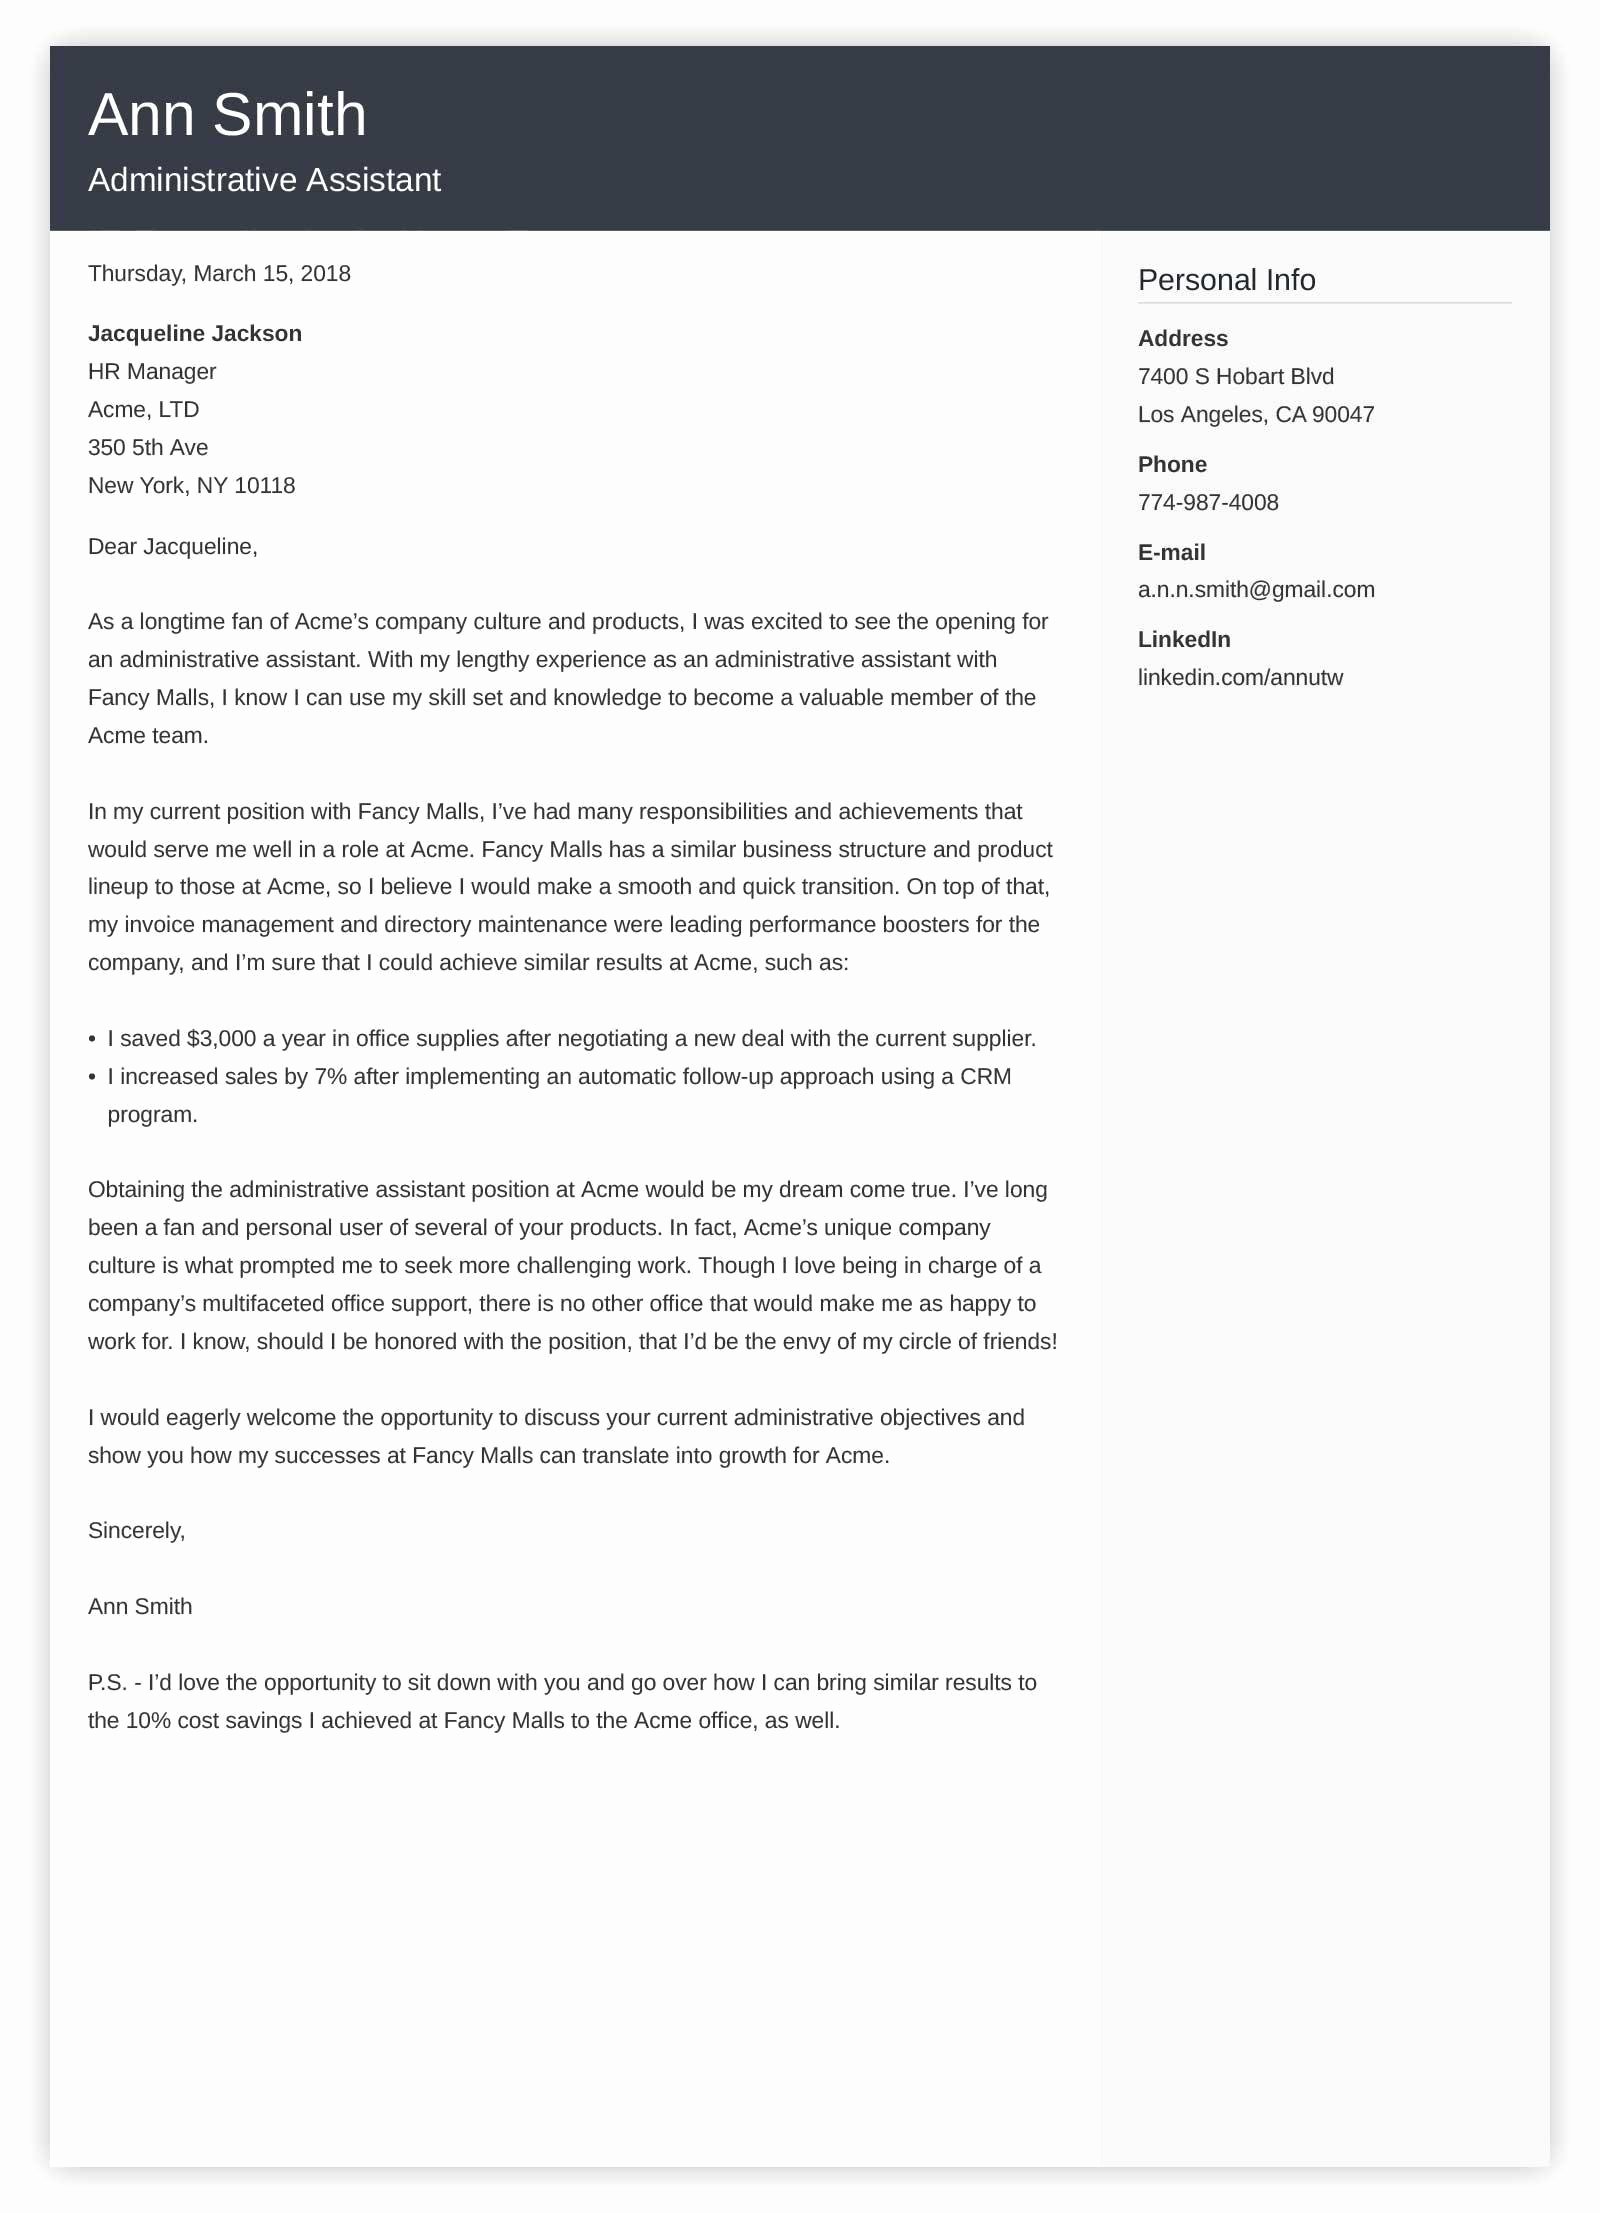 Personal assistant Cover Letter Elegant Administrative assistant Cover Letter Sample &amp; Guide [20 Examples]